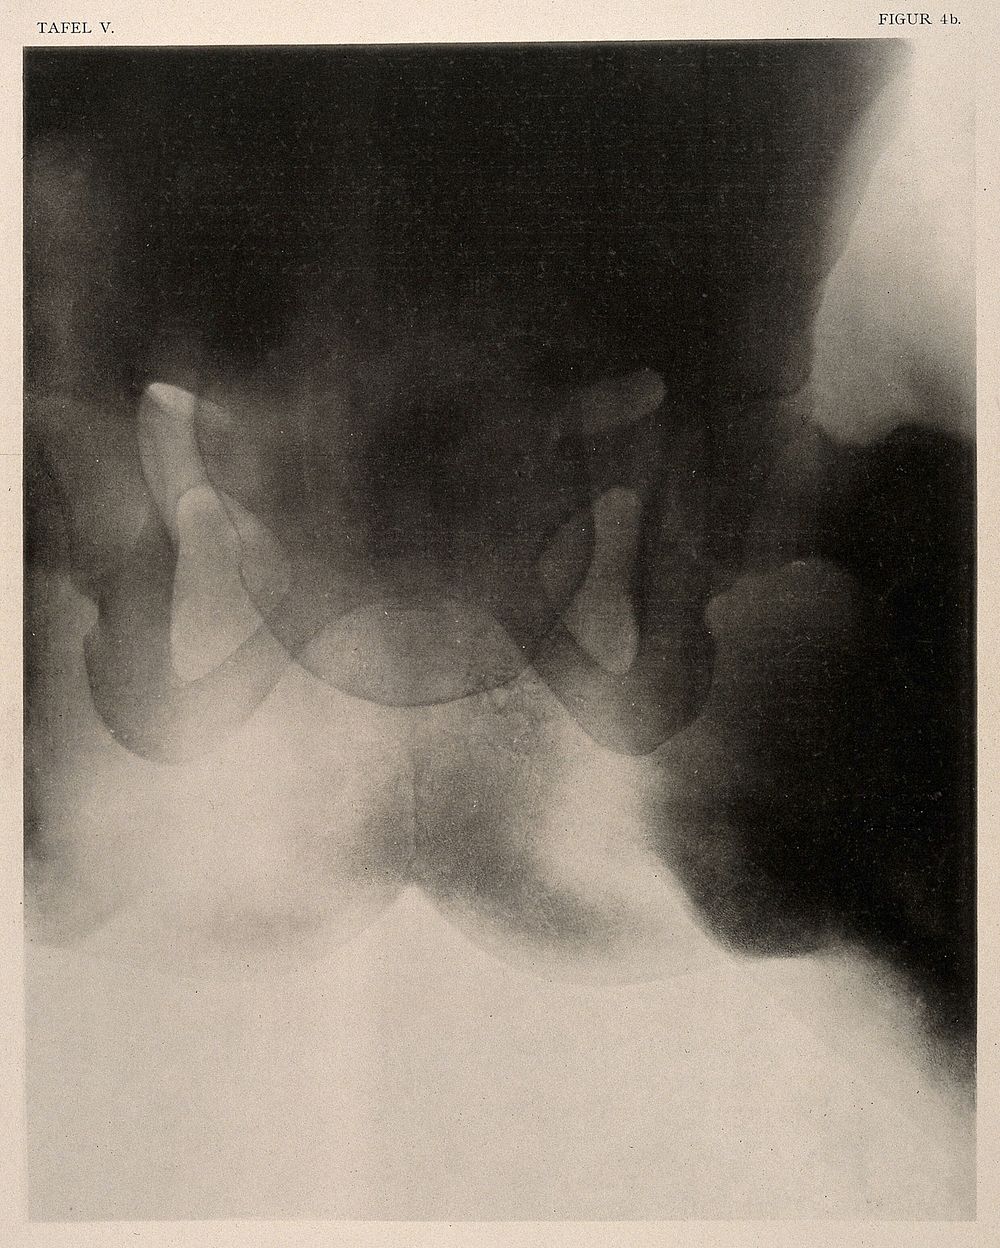 A woman's narrow pelvis with child's head stuck in the middle of a labour. Collotype by Römmler & Jonas after a radiograph…